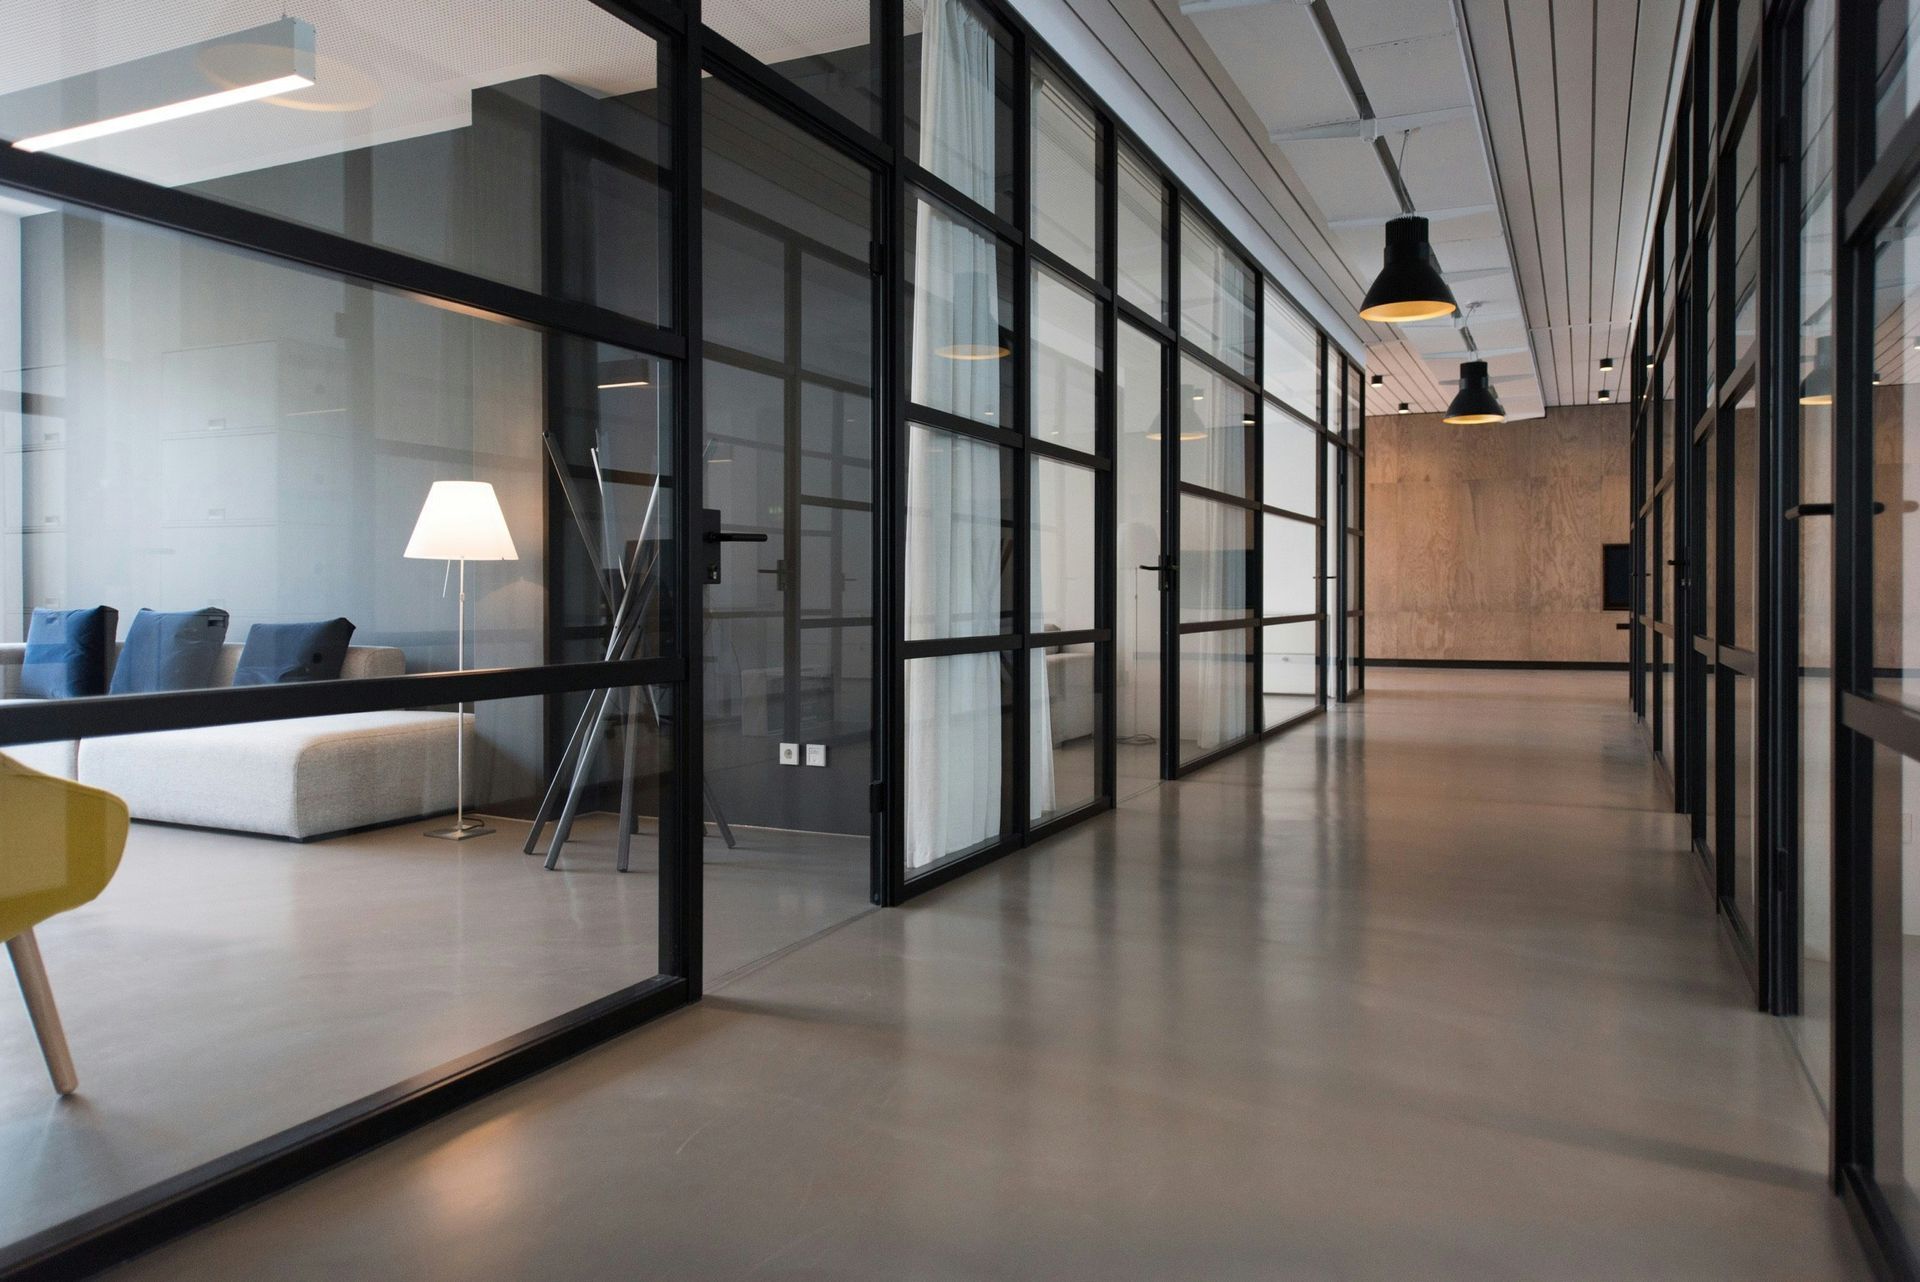 First Impressions of Your Office Space
